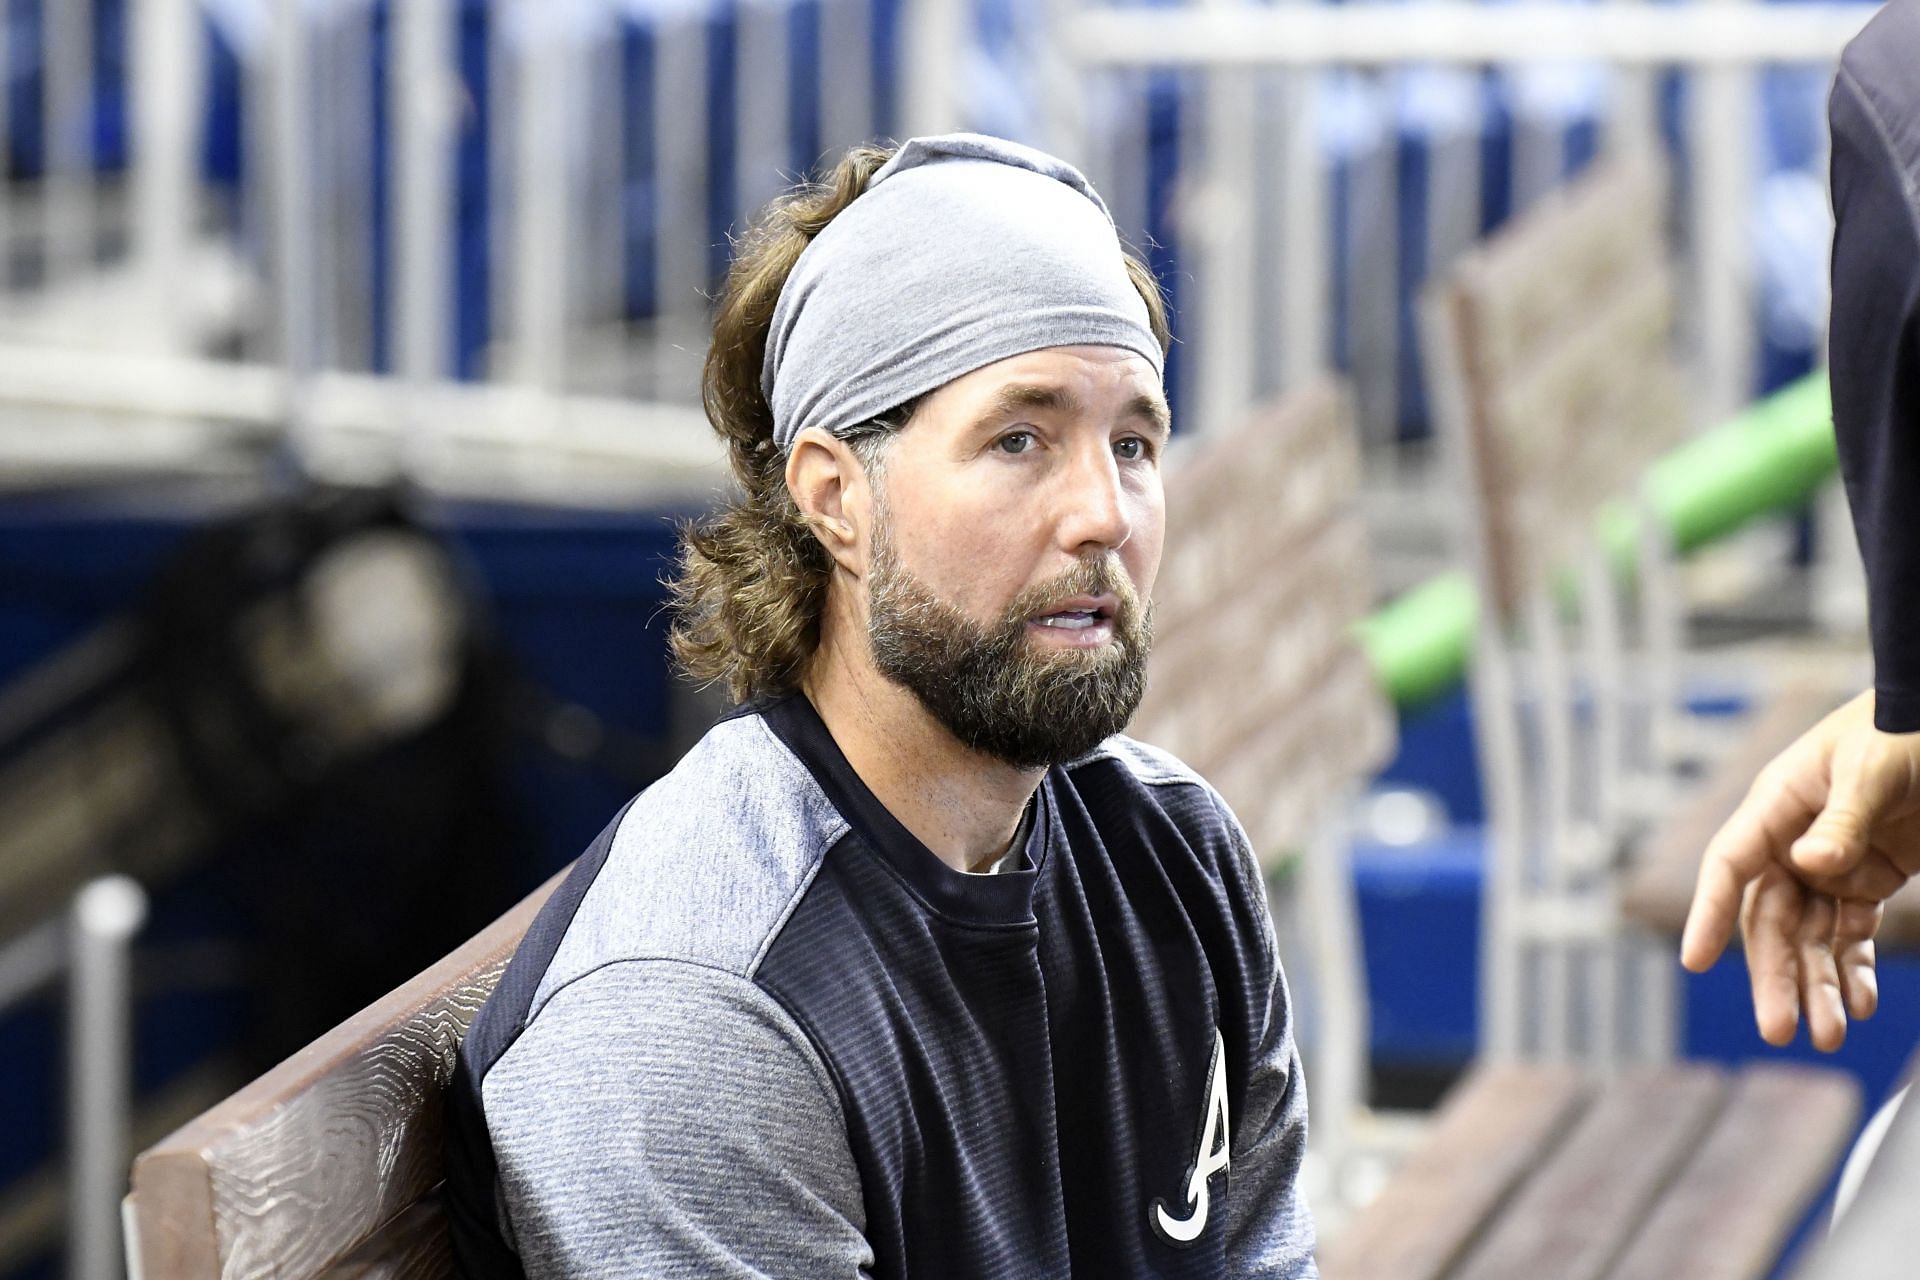 MIAMI, FL - MAY 14: R.A. Dickey #19 of the Atlanta Braves sits in the dugout before the start of the game against the Miami Marlins at Marlins Park on May 14, 2017 in Miami, Florida. (Photo by Eric Espada/Getty Images)